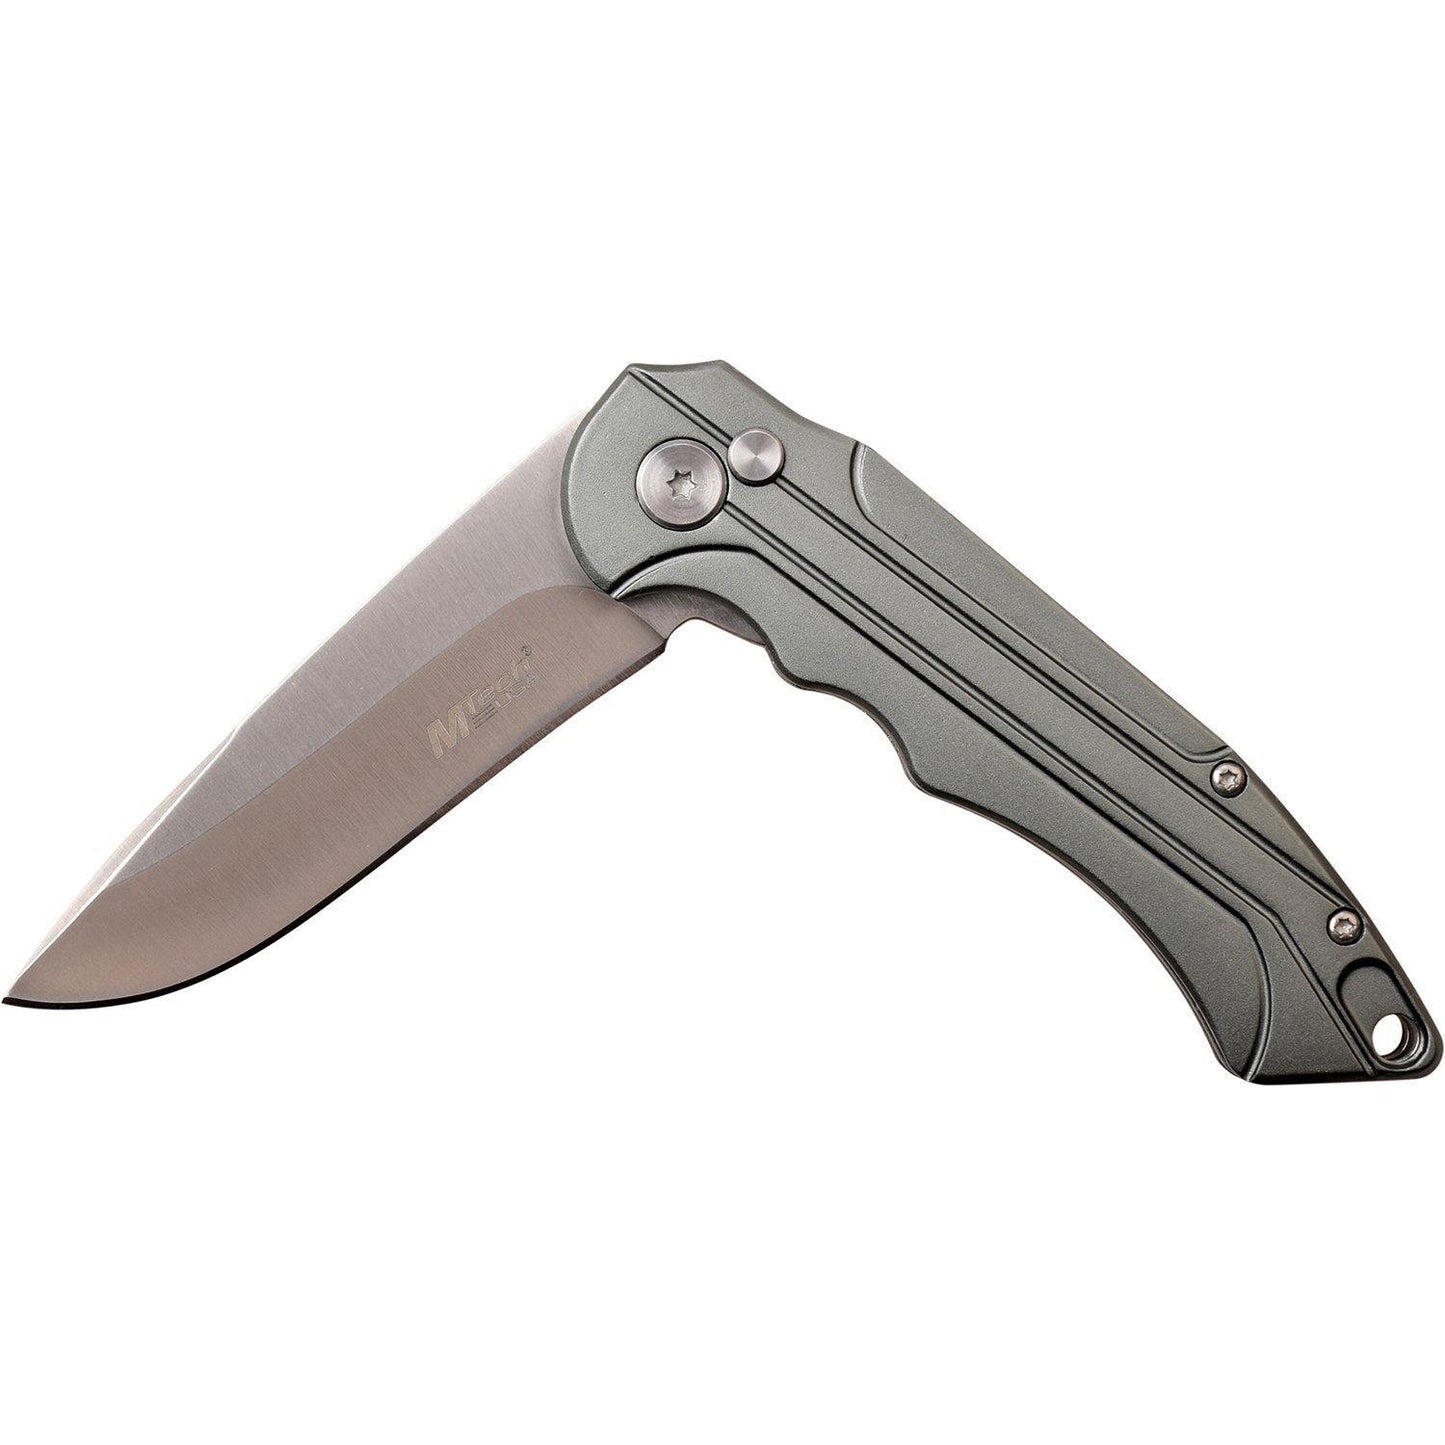 Mtech Drop Point Fine Edge Blade Folding Knife - 7.6 Inches Overall #mt-1022Gy - Xhunter New Zealand